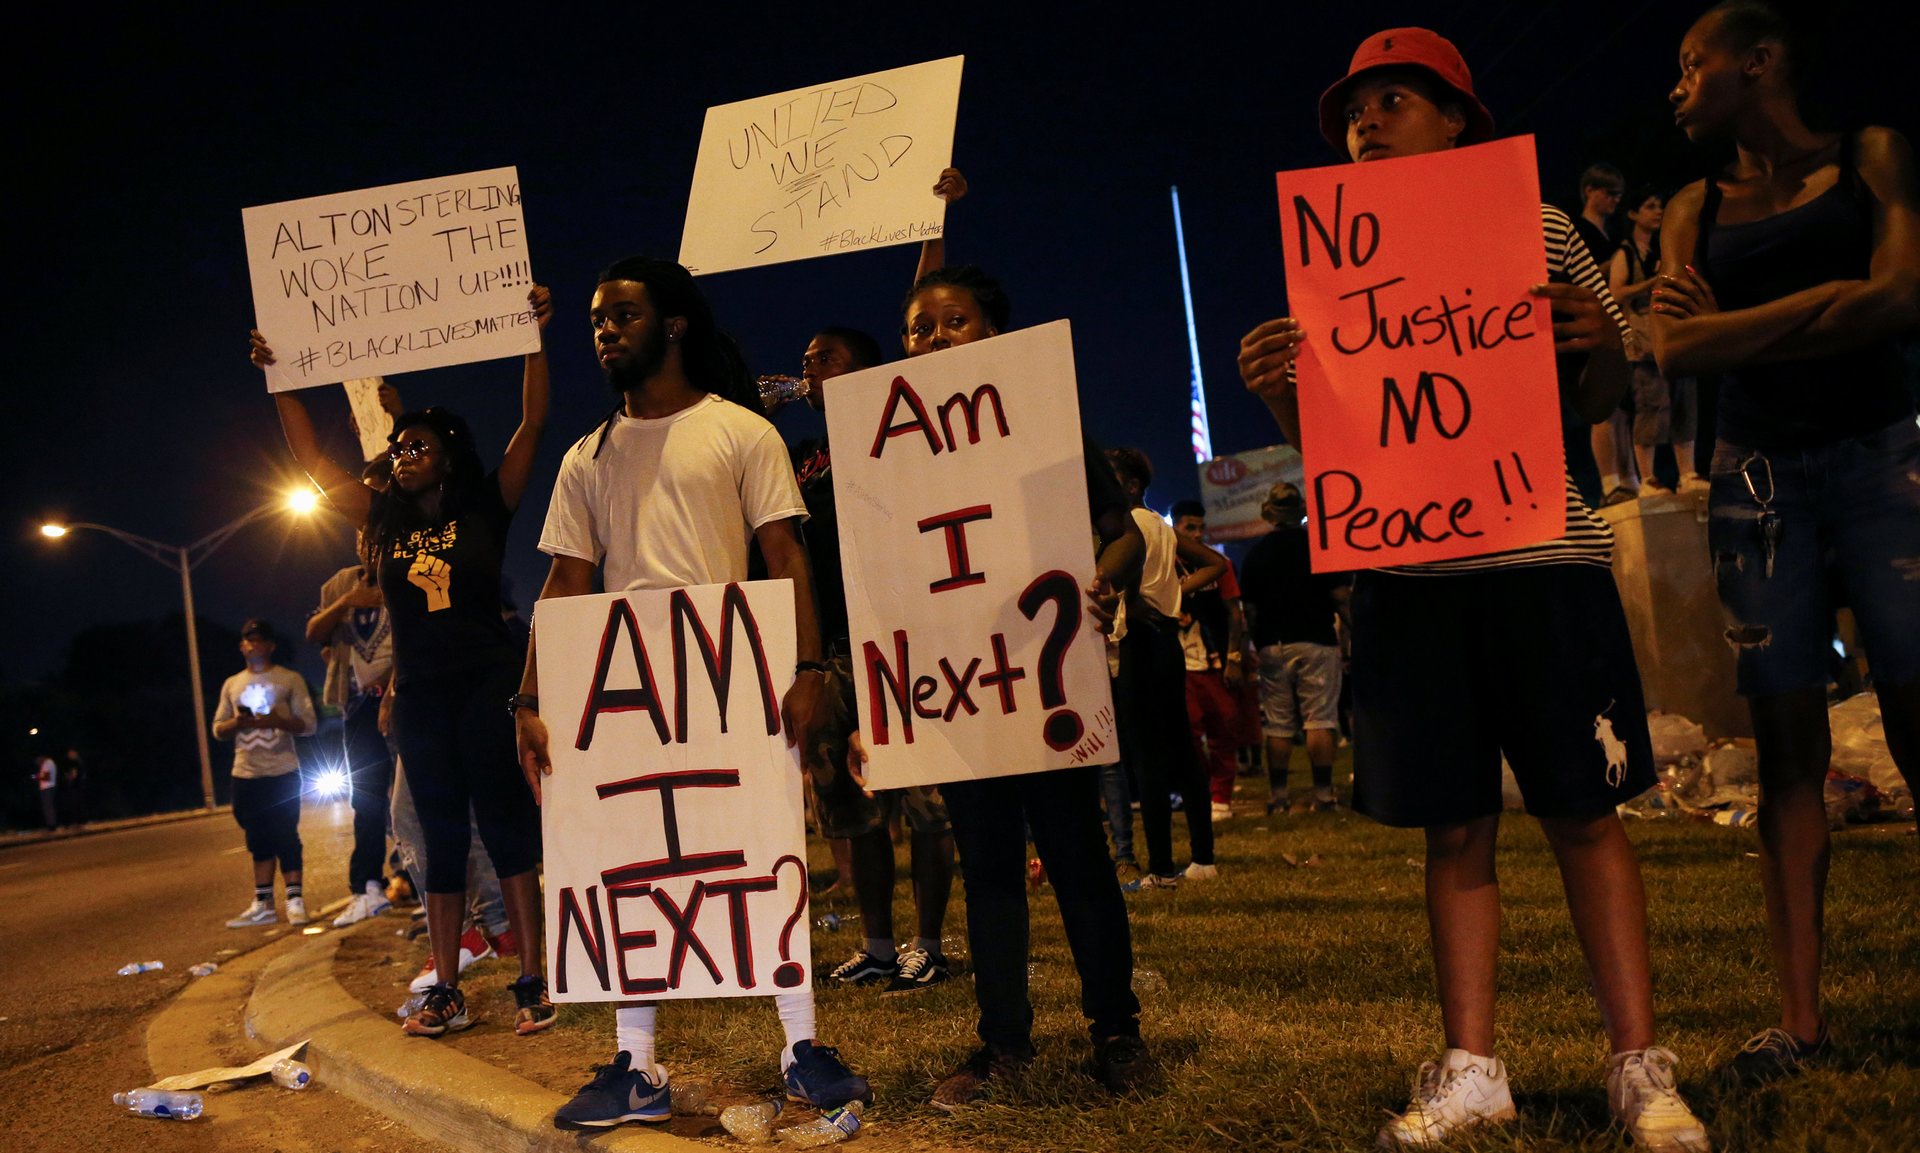 Demonstrators protest the shooting death of Alton Sterling near the headquarters of the Baton Rouge police department in Louisiana on Sunday. Photograph: Shannon Stapleton/Reuters